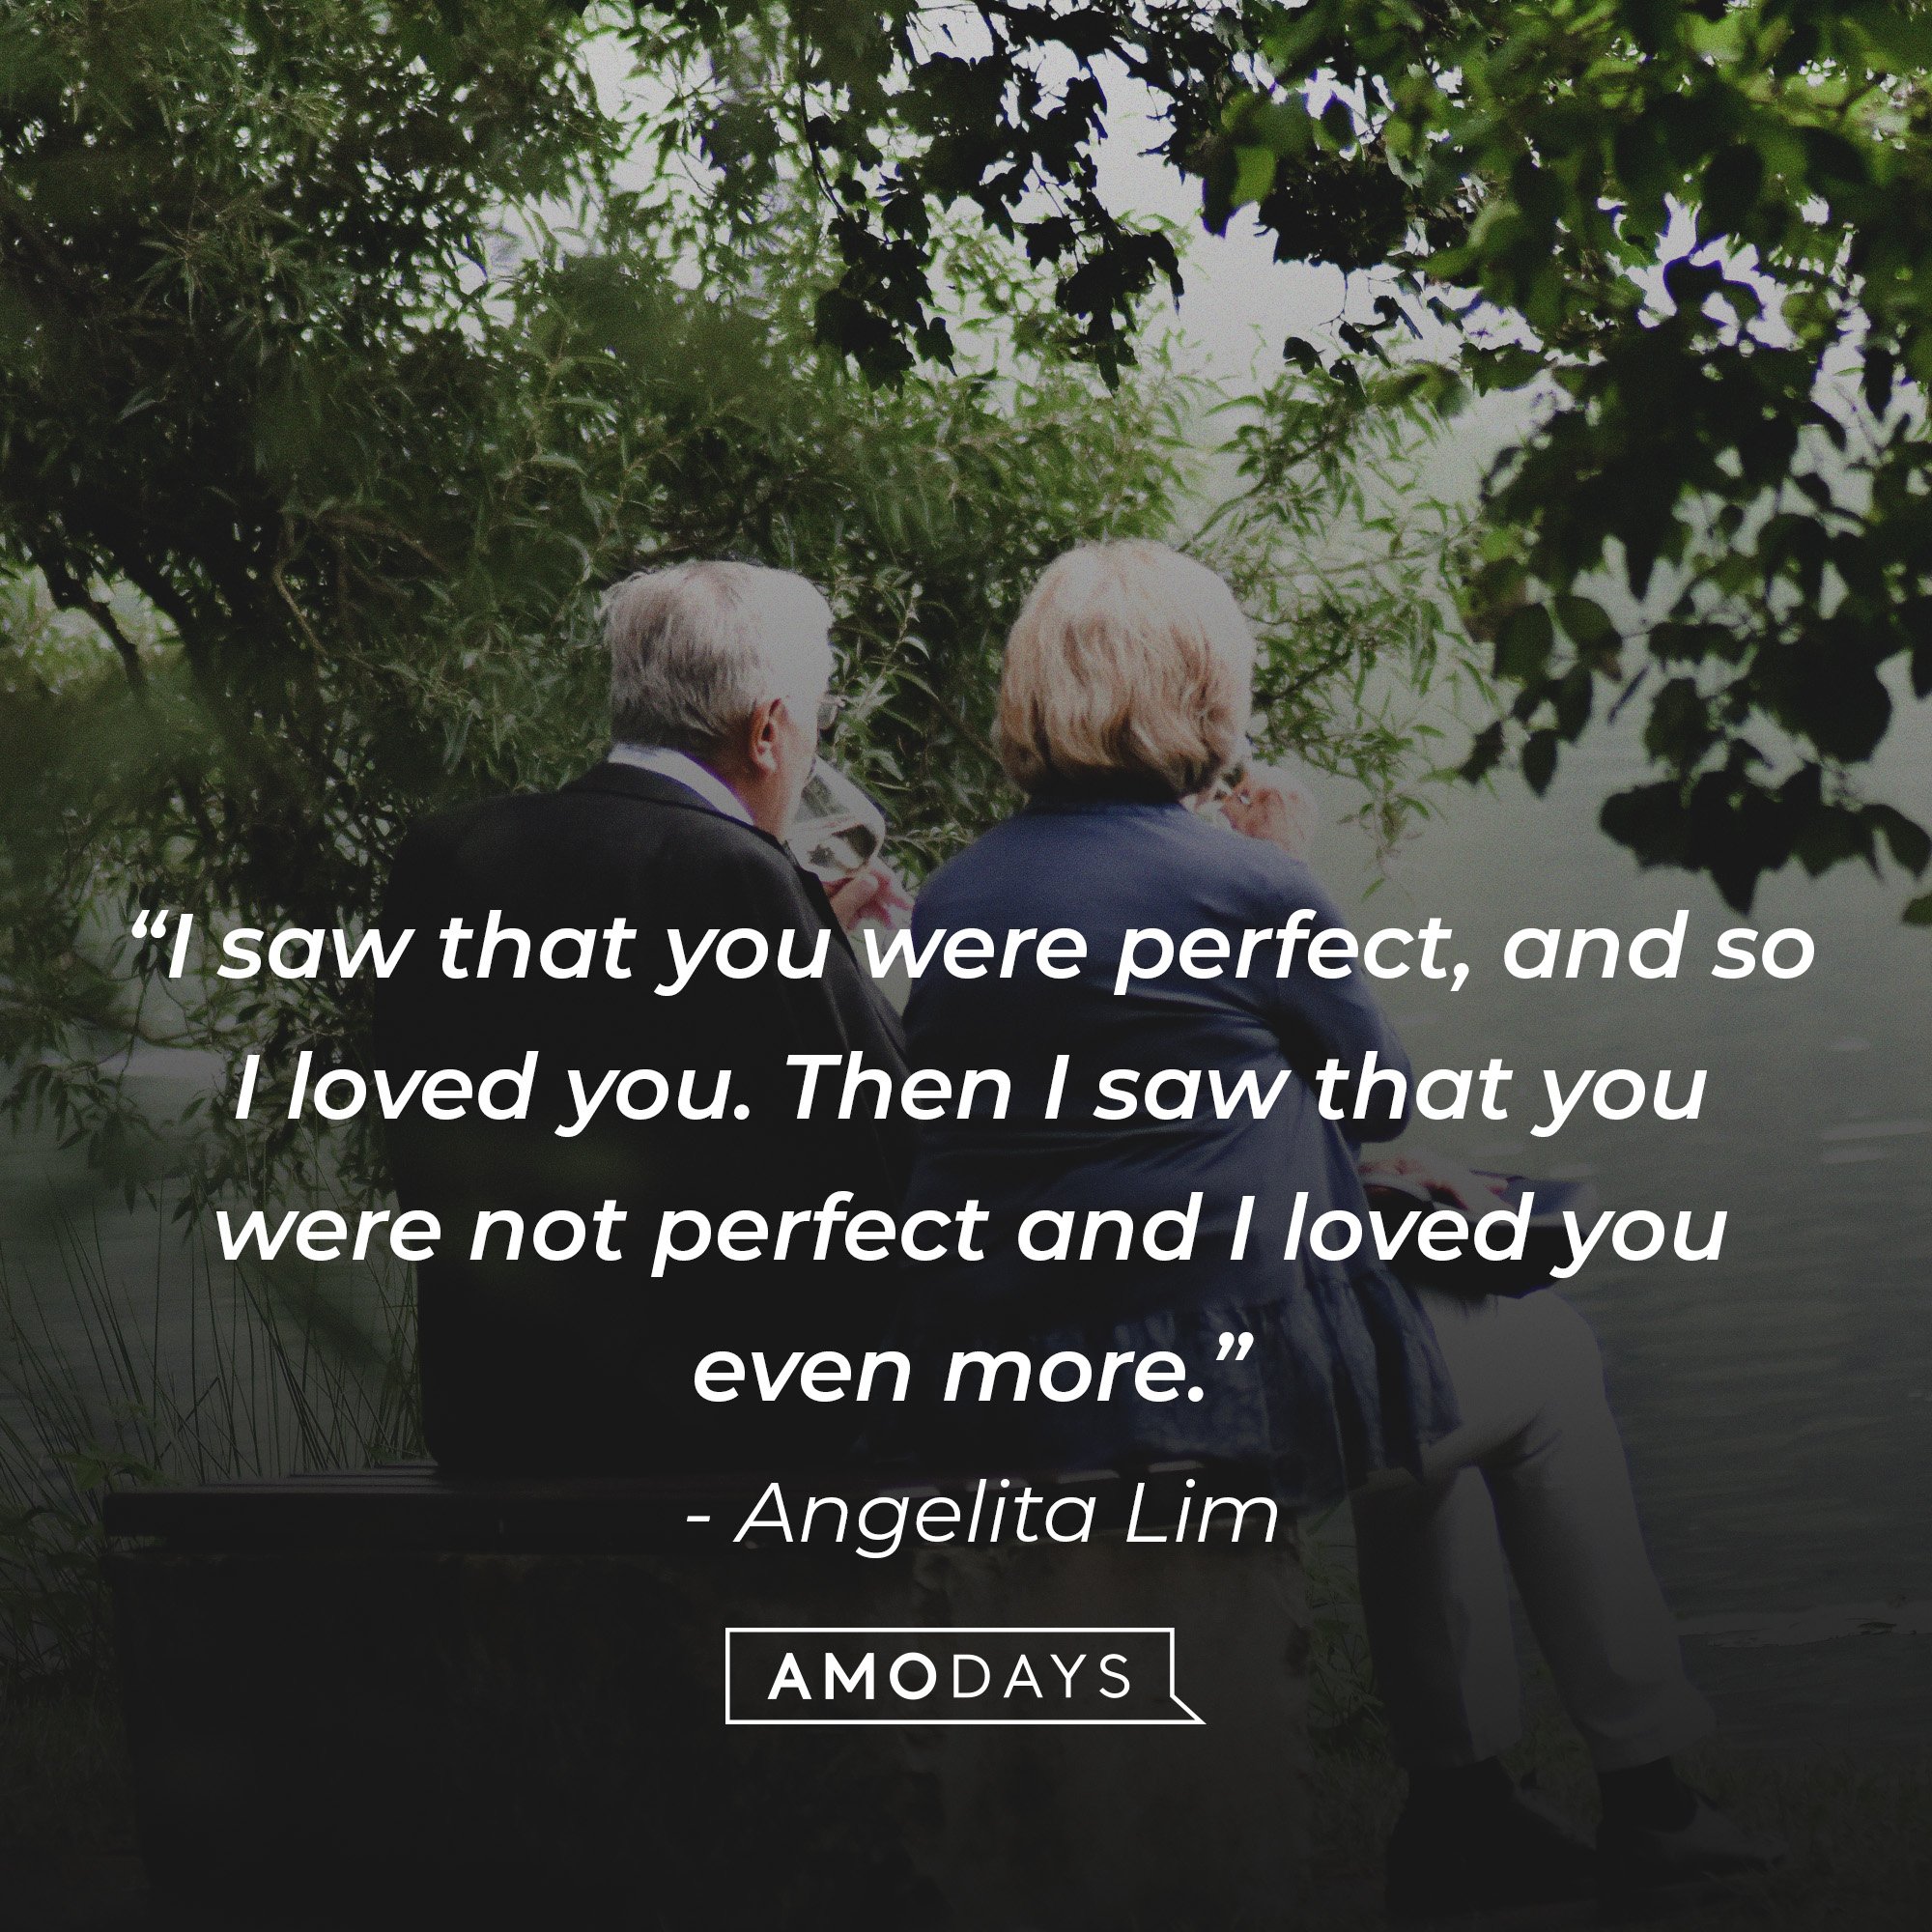 Angelita Lim's quote: “I saw that you were perfect, and so I loved you. Then I saw that you were not perfect and I loved you even more.” | Image: AmoDays